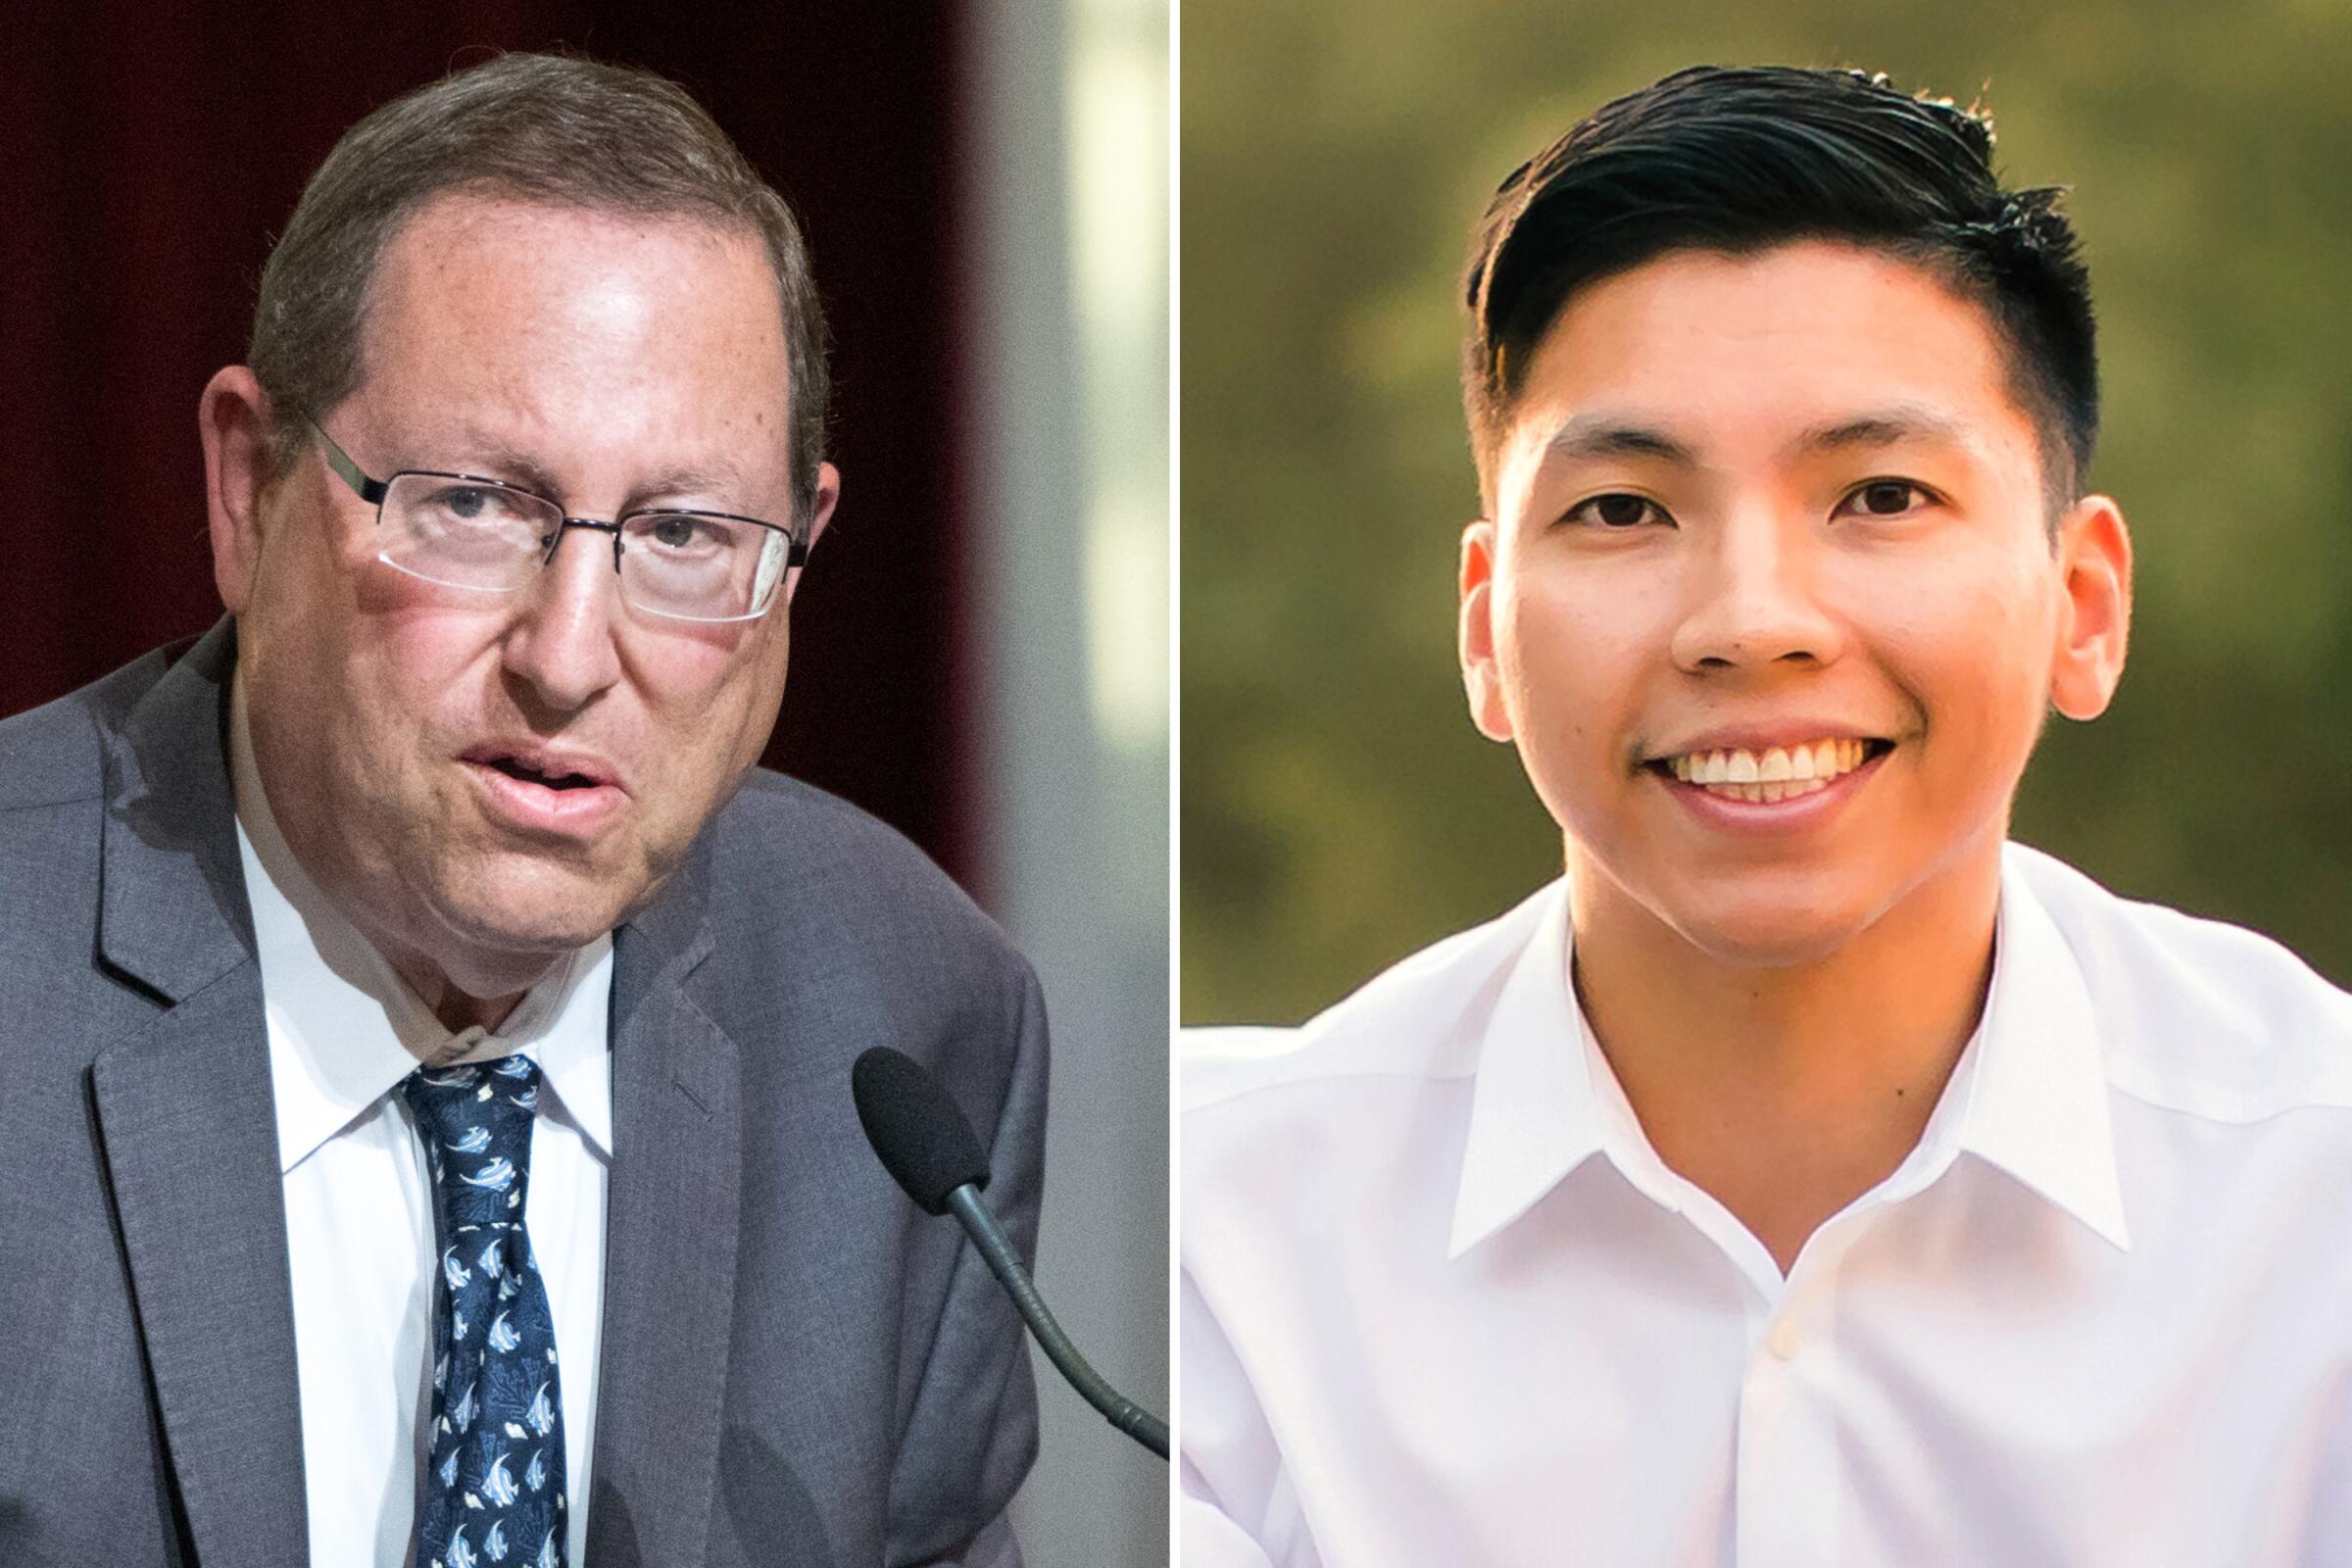 Candidates for city controller Paul Koretz, left, and Kenneth Mejia.